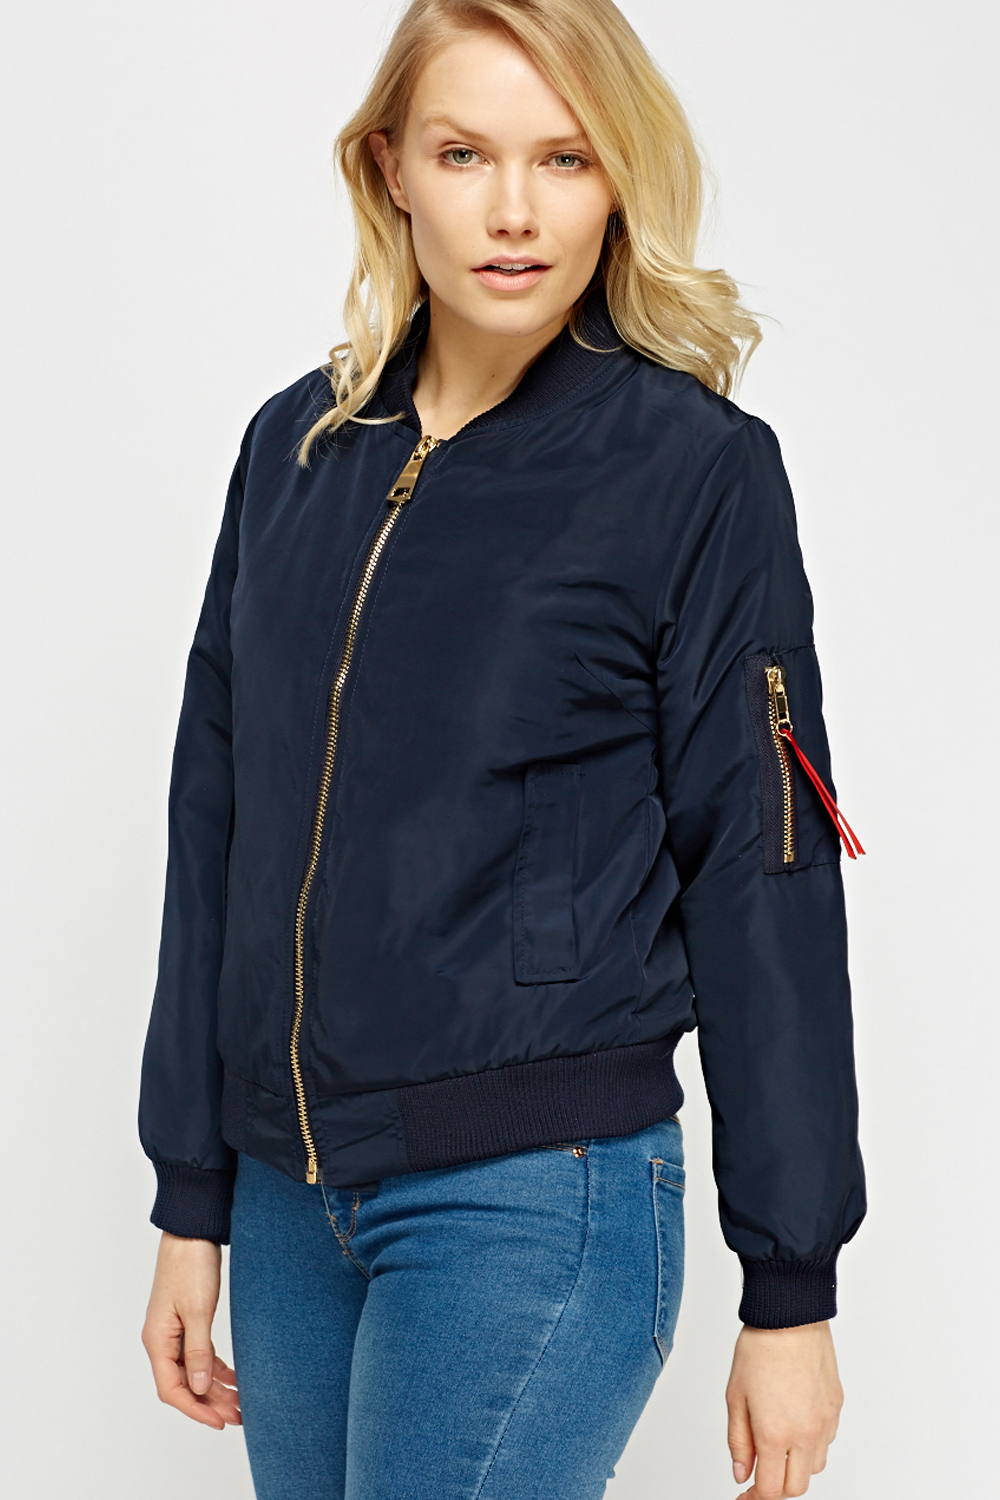 A1 Bomber Jacket - Just $7